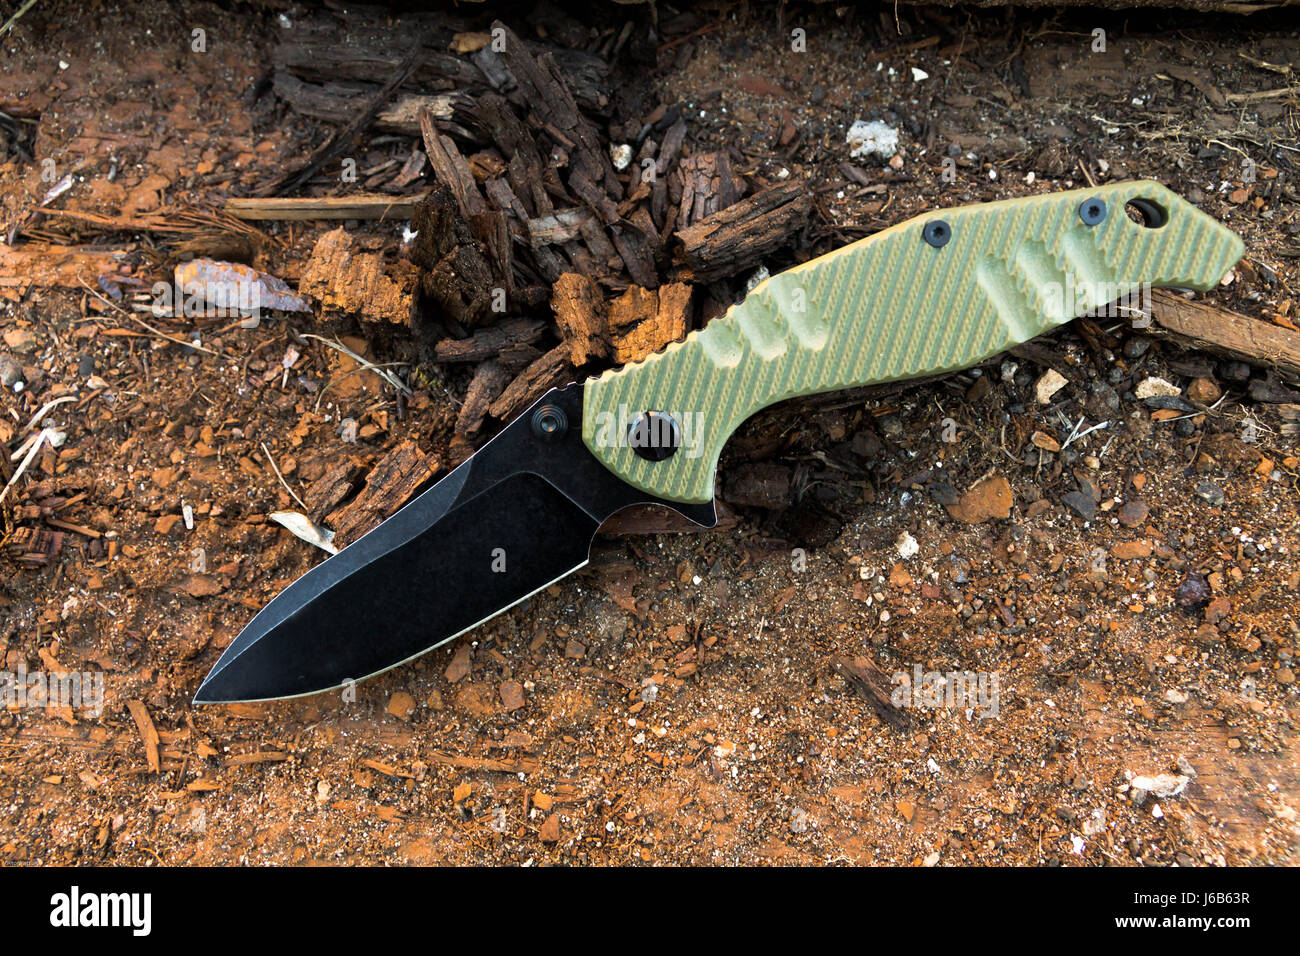 Knife with black blade and green handl. Old wood. Stock Photo